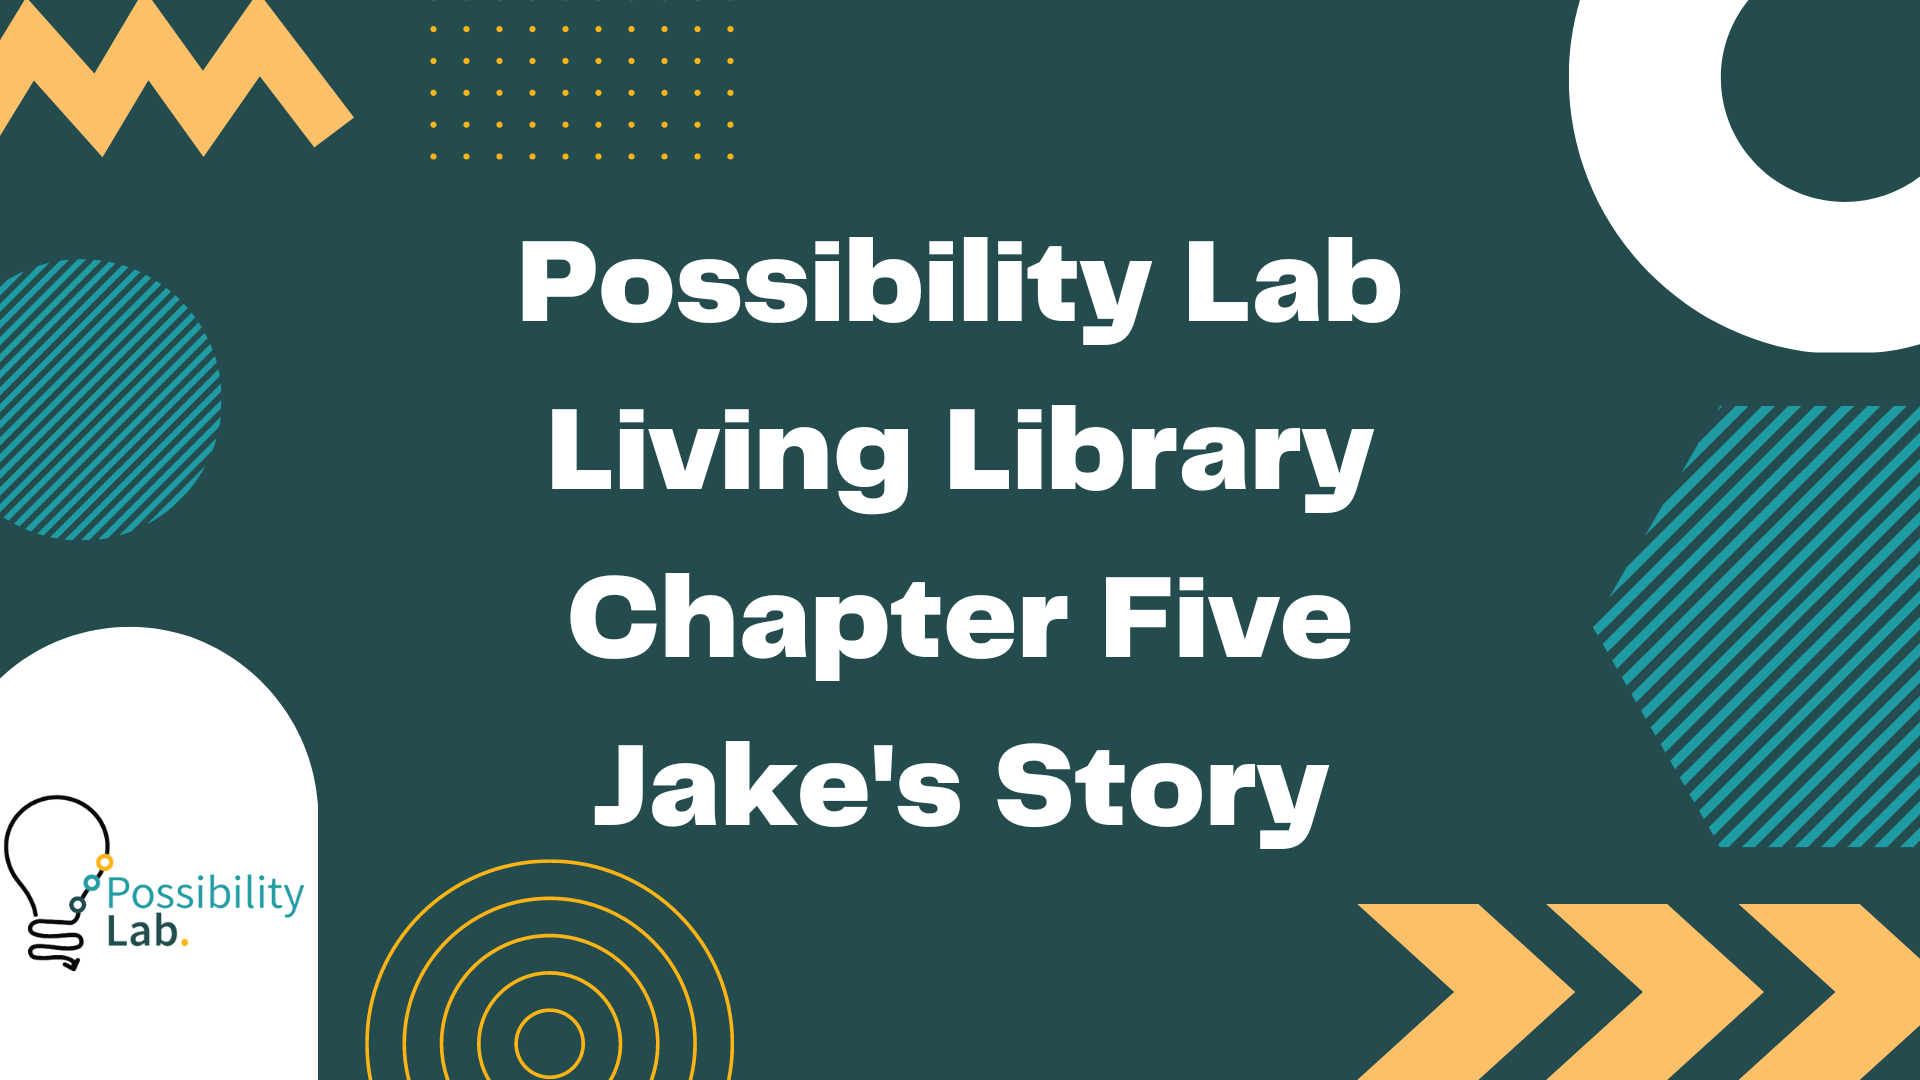 A slide from our living library videos. It has a green background and squiggle designs in white, lighter green and orange. The possibility lab logo is on the bottom left and text on the slide reads Possibility Lab Living Library Chapter Five Jake's Story